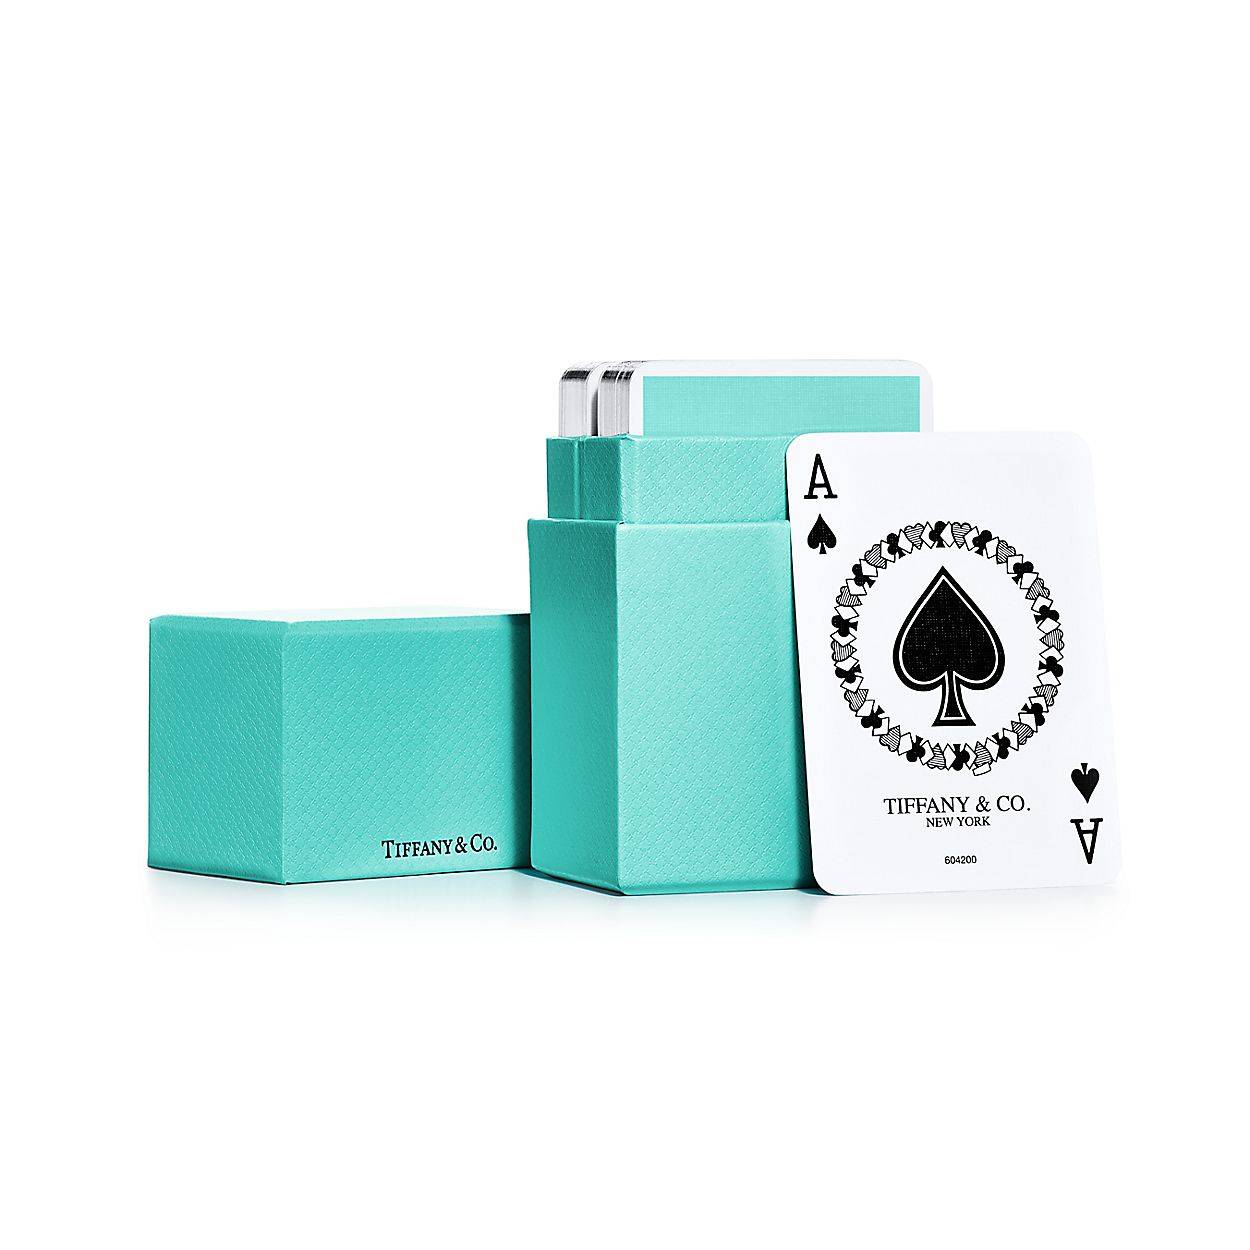 Playing Cards of Tiffany & Co. With a Bold Logo to Ensure You’re a Winner No Matter How You Play.